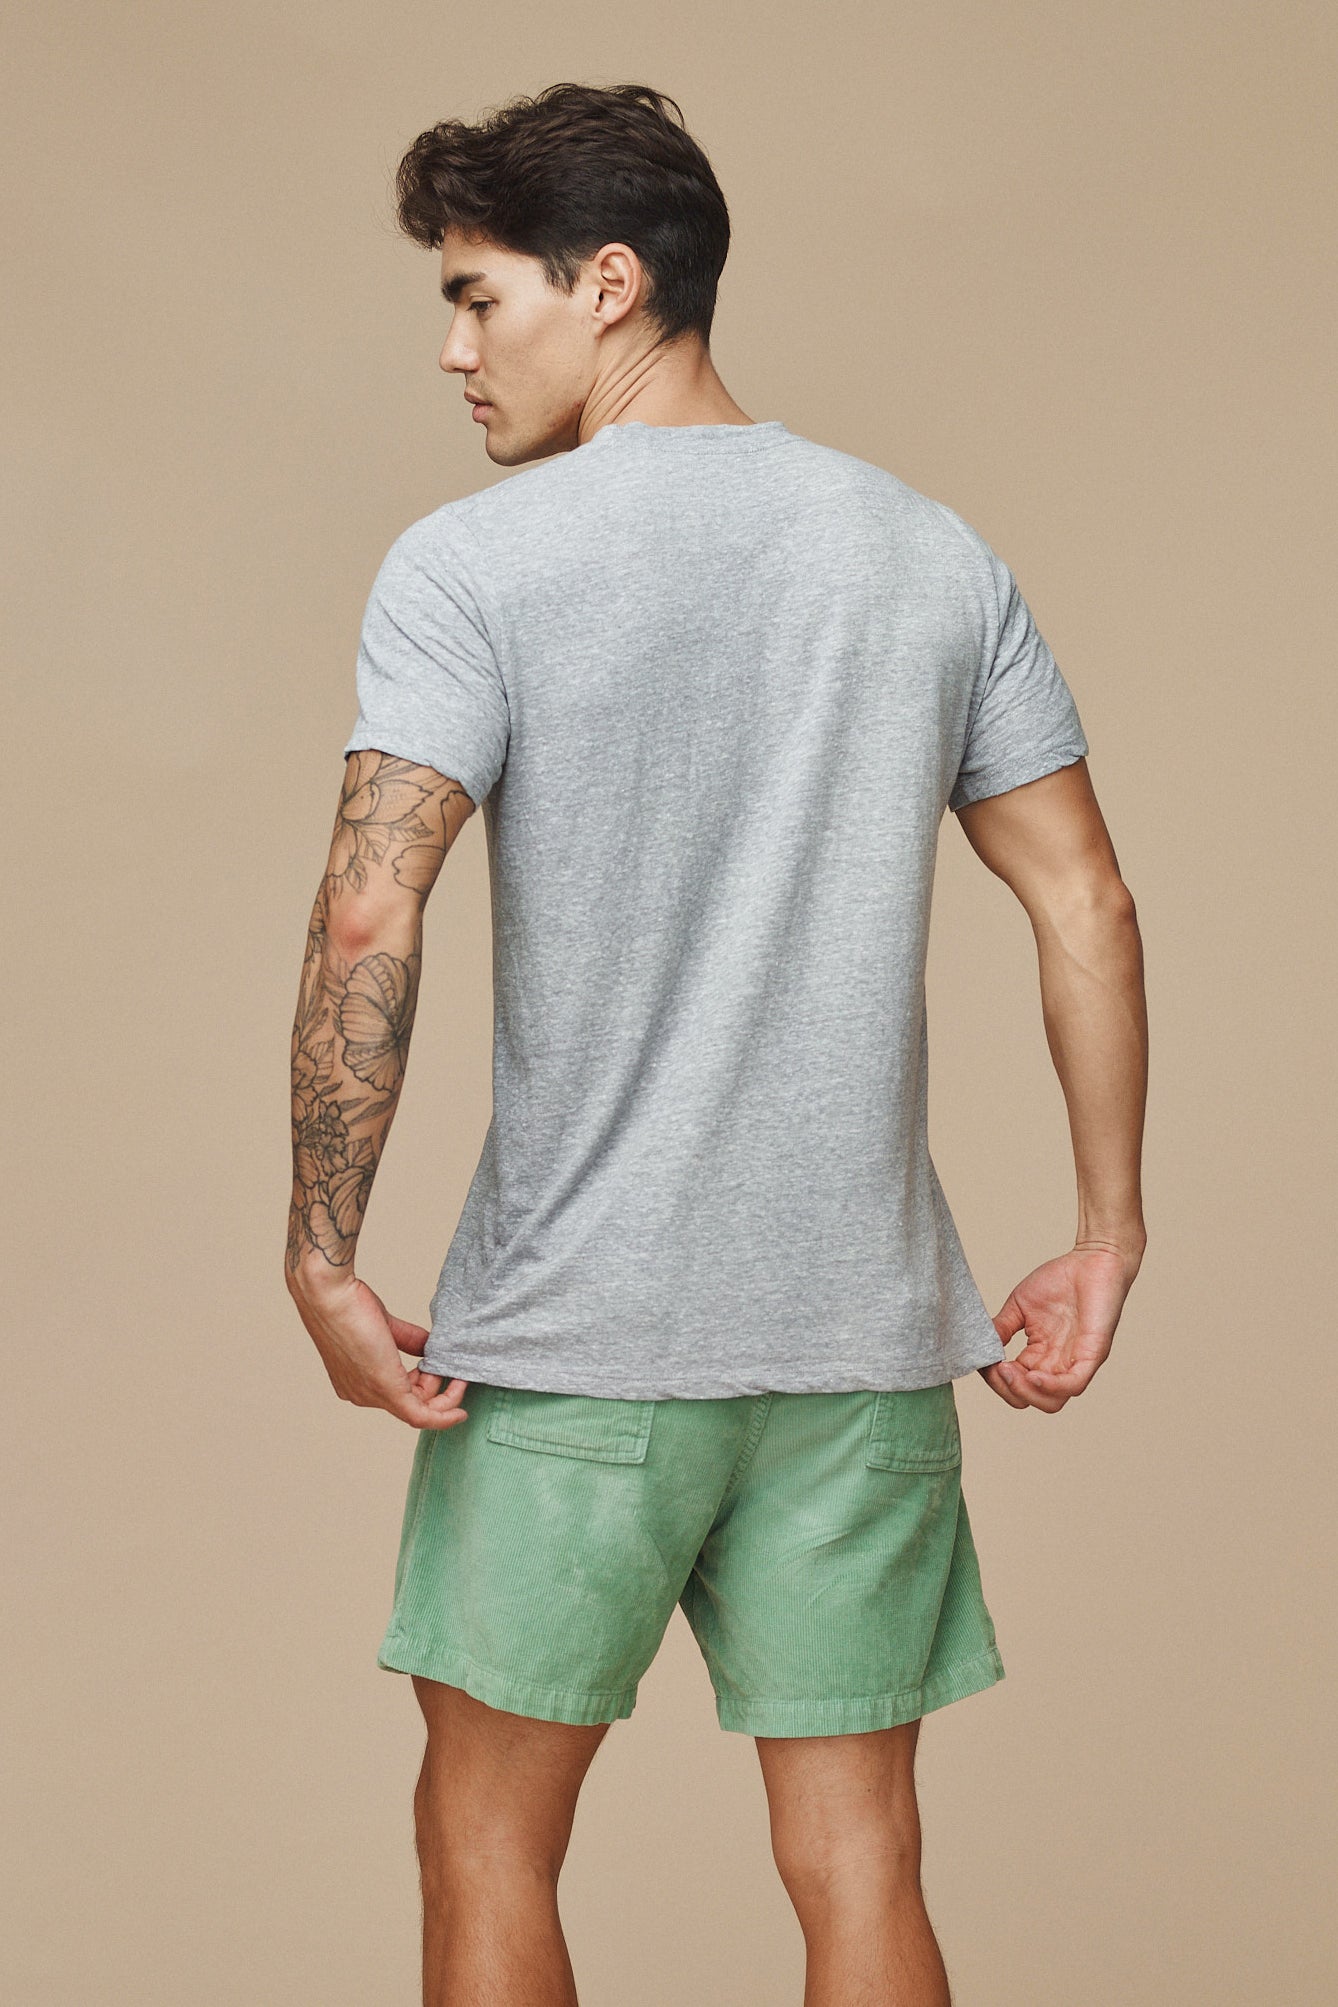 Heathered Jung Tee | Jungmaven Hemp Clothing & Accessories / Color: